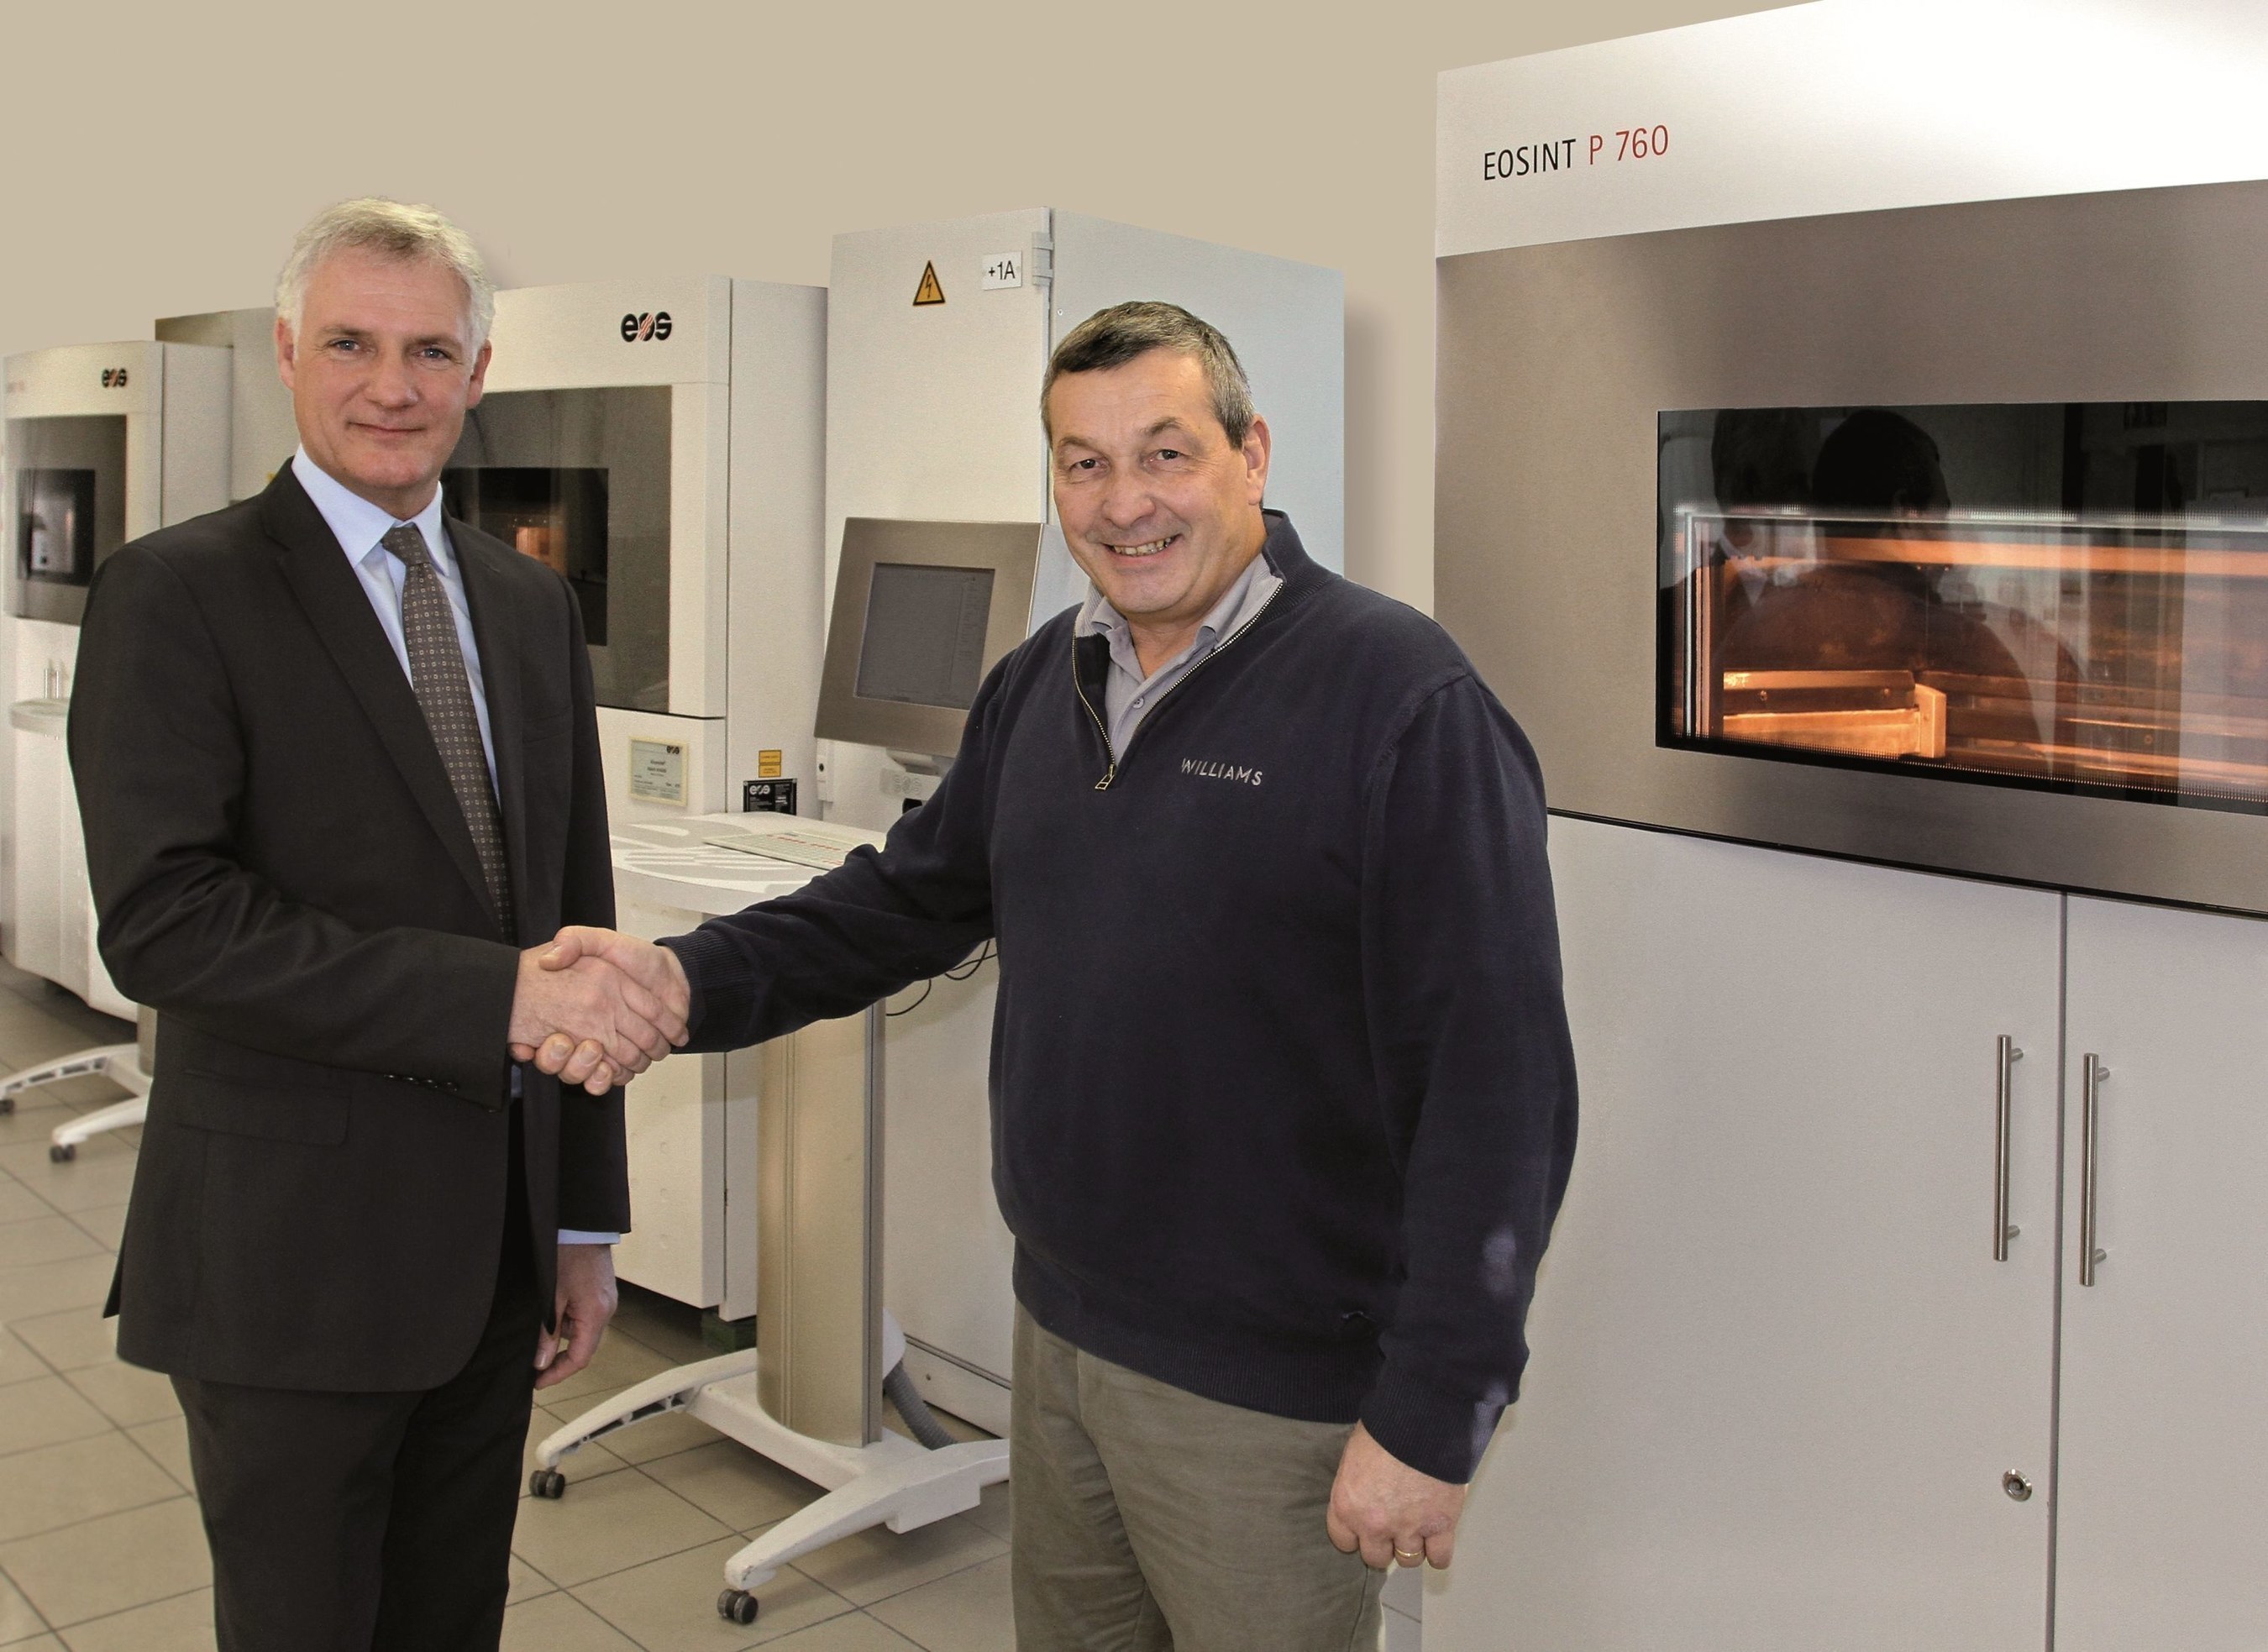 (f.l.t.r.) Stuart Jackson, Regional Manager EOS UK with Richard Brady, Advanced Digital Manufacturing Leader, in front of an EOSINT P 760 system (Source: EOS) (PRNewsFoto/EOS India) (PRNewsFoto/EOS India)